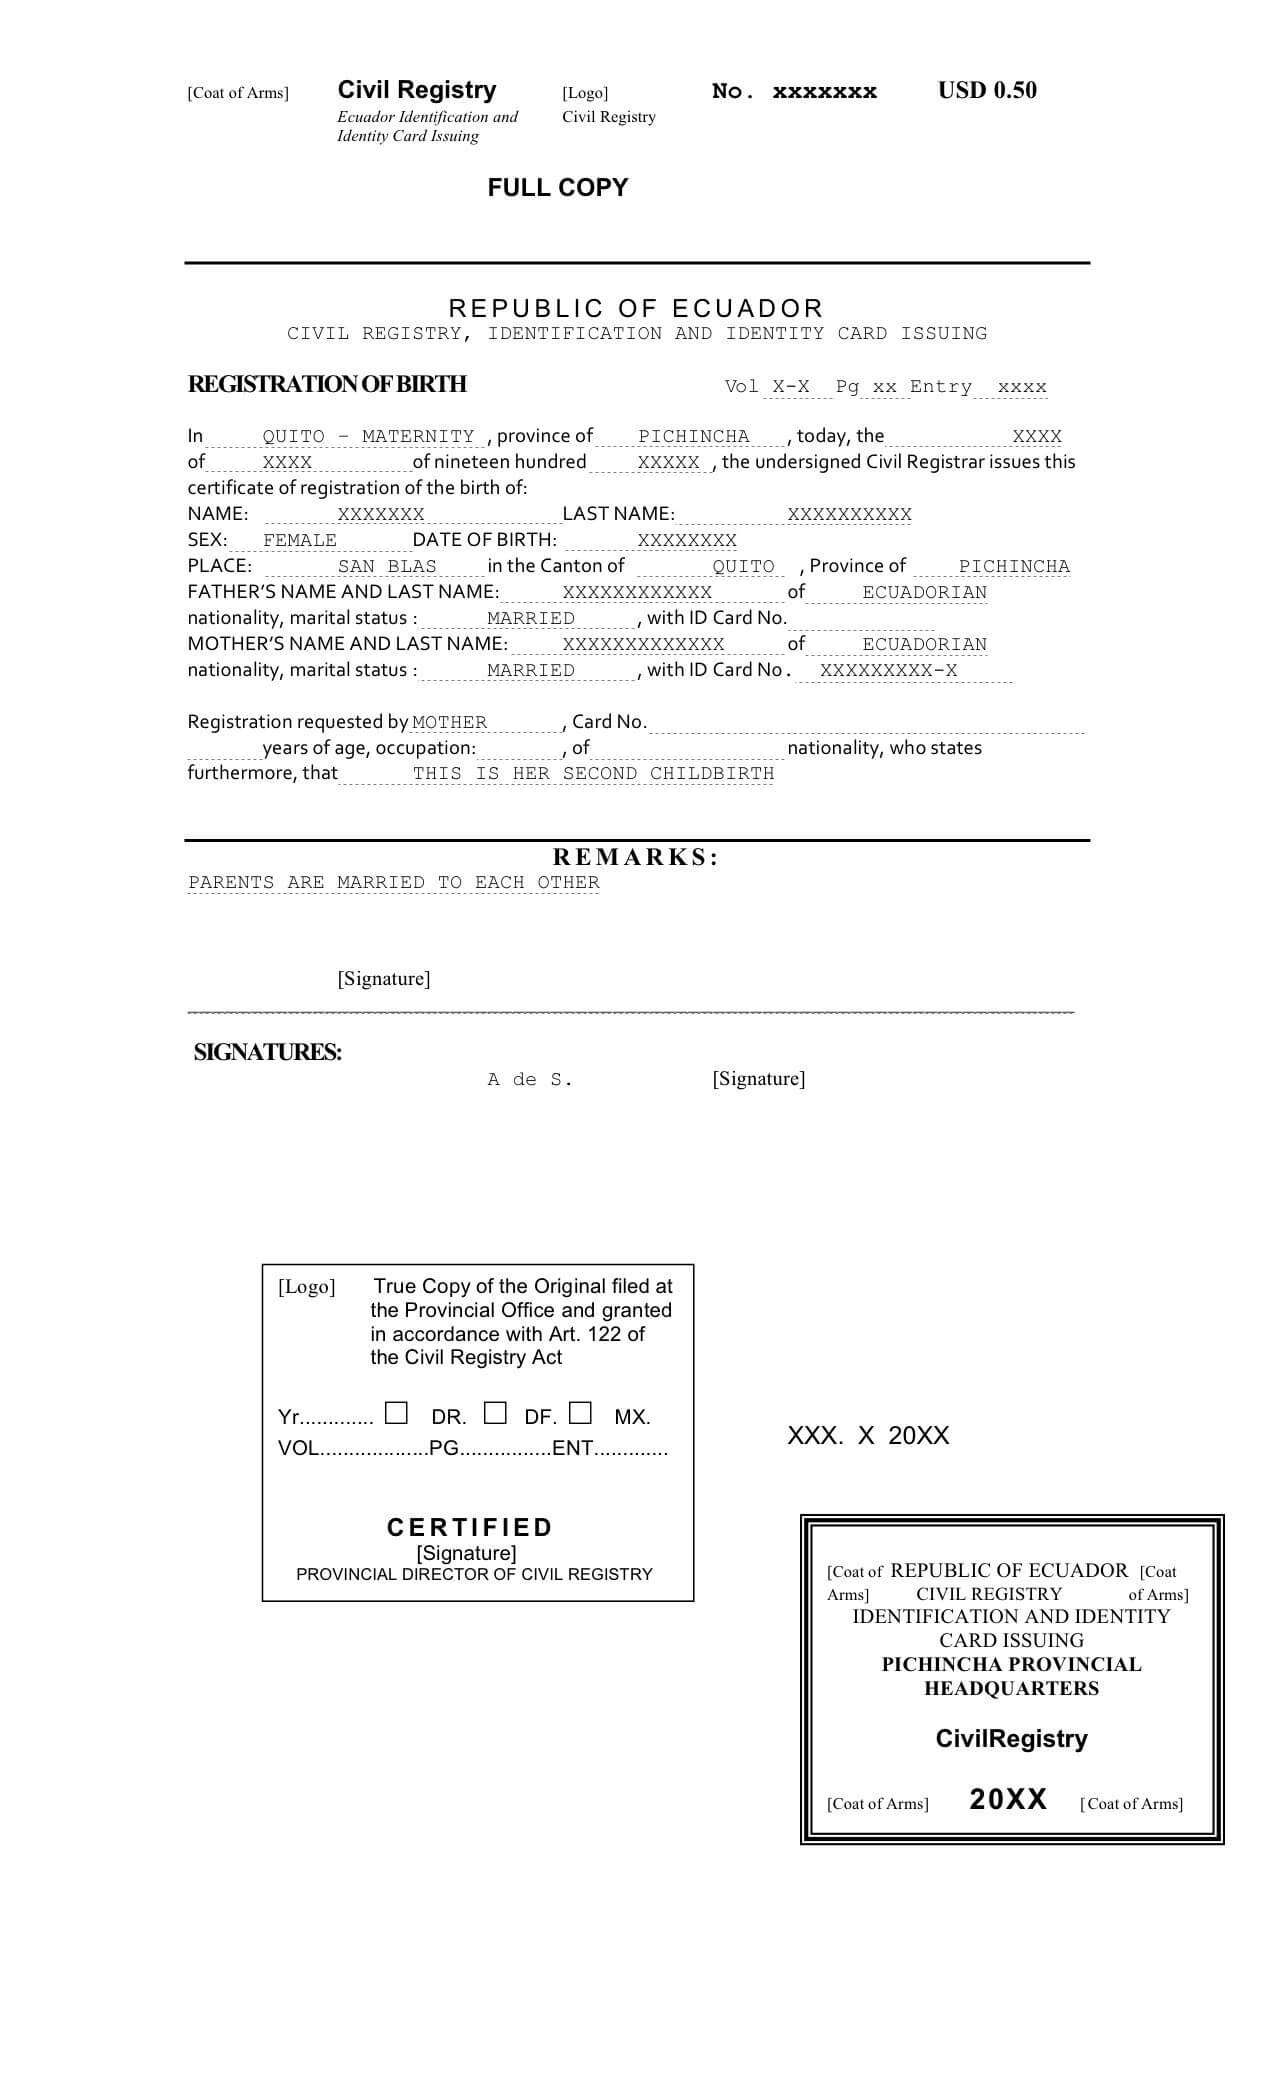 Death Certificate Translation From Spanish To English Sample For Death Certificate Translation Template